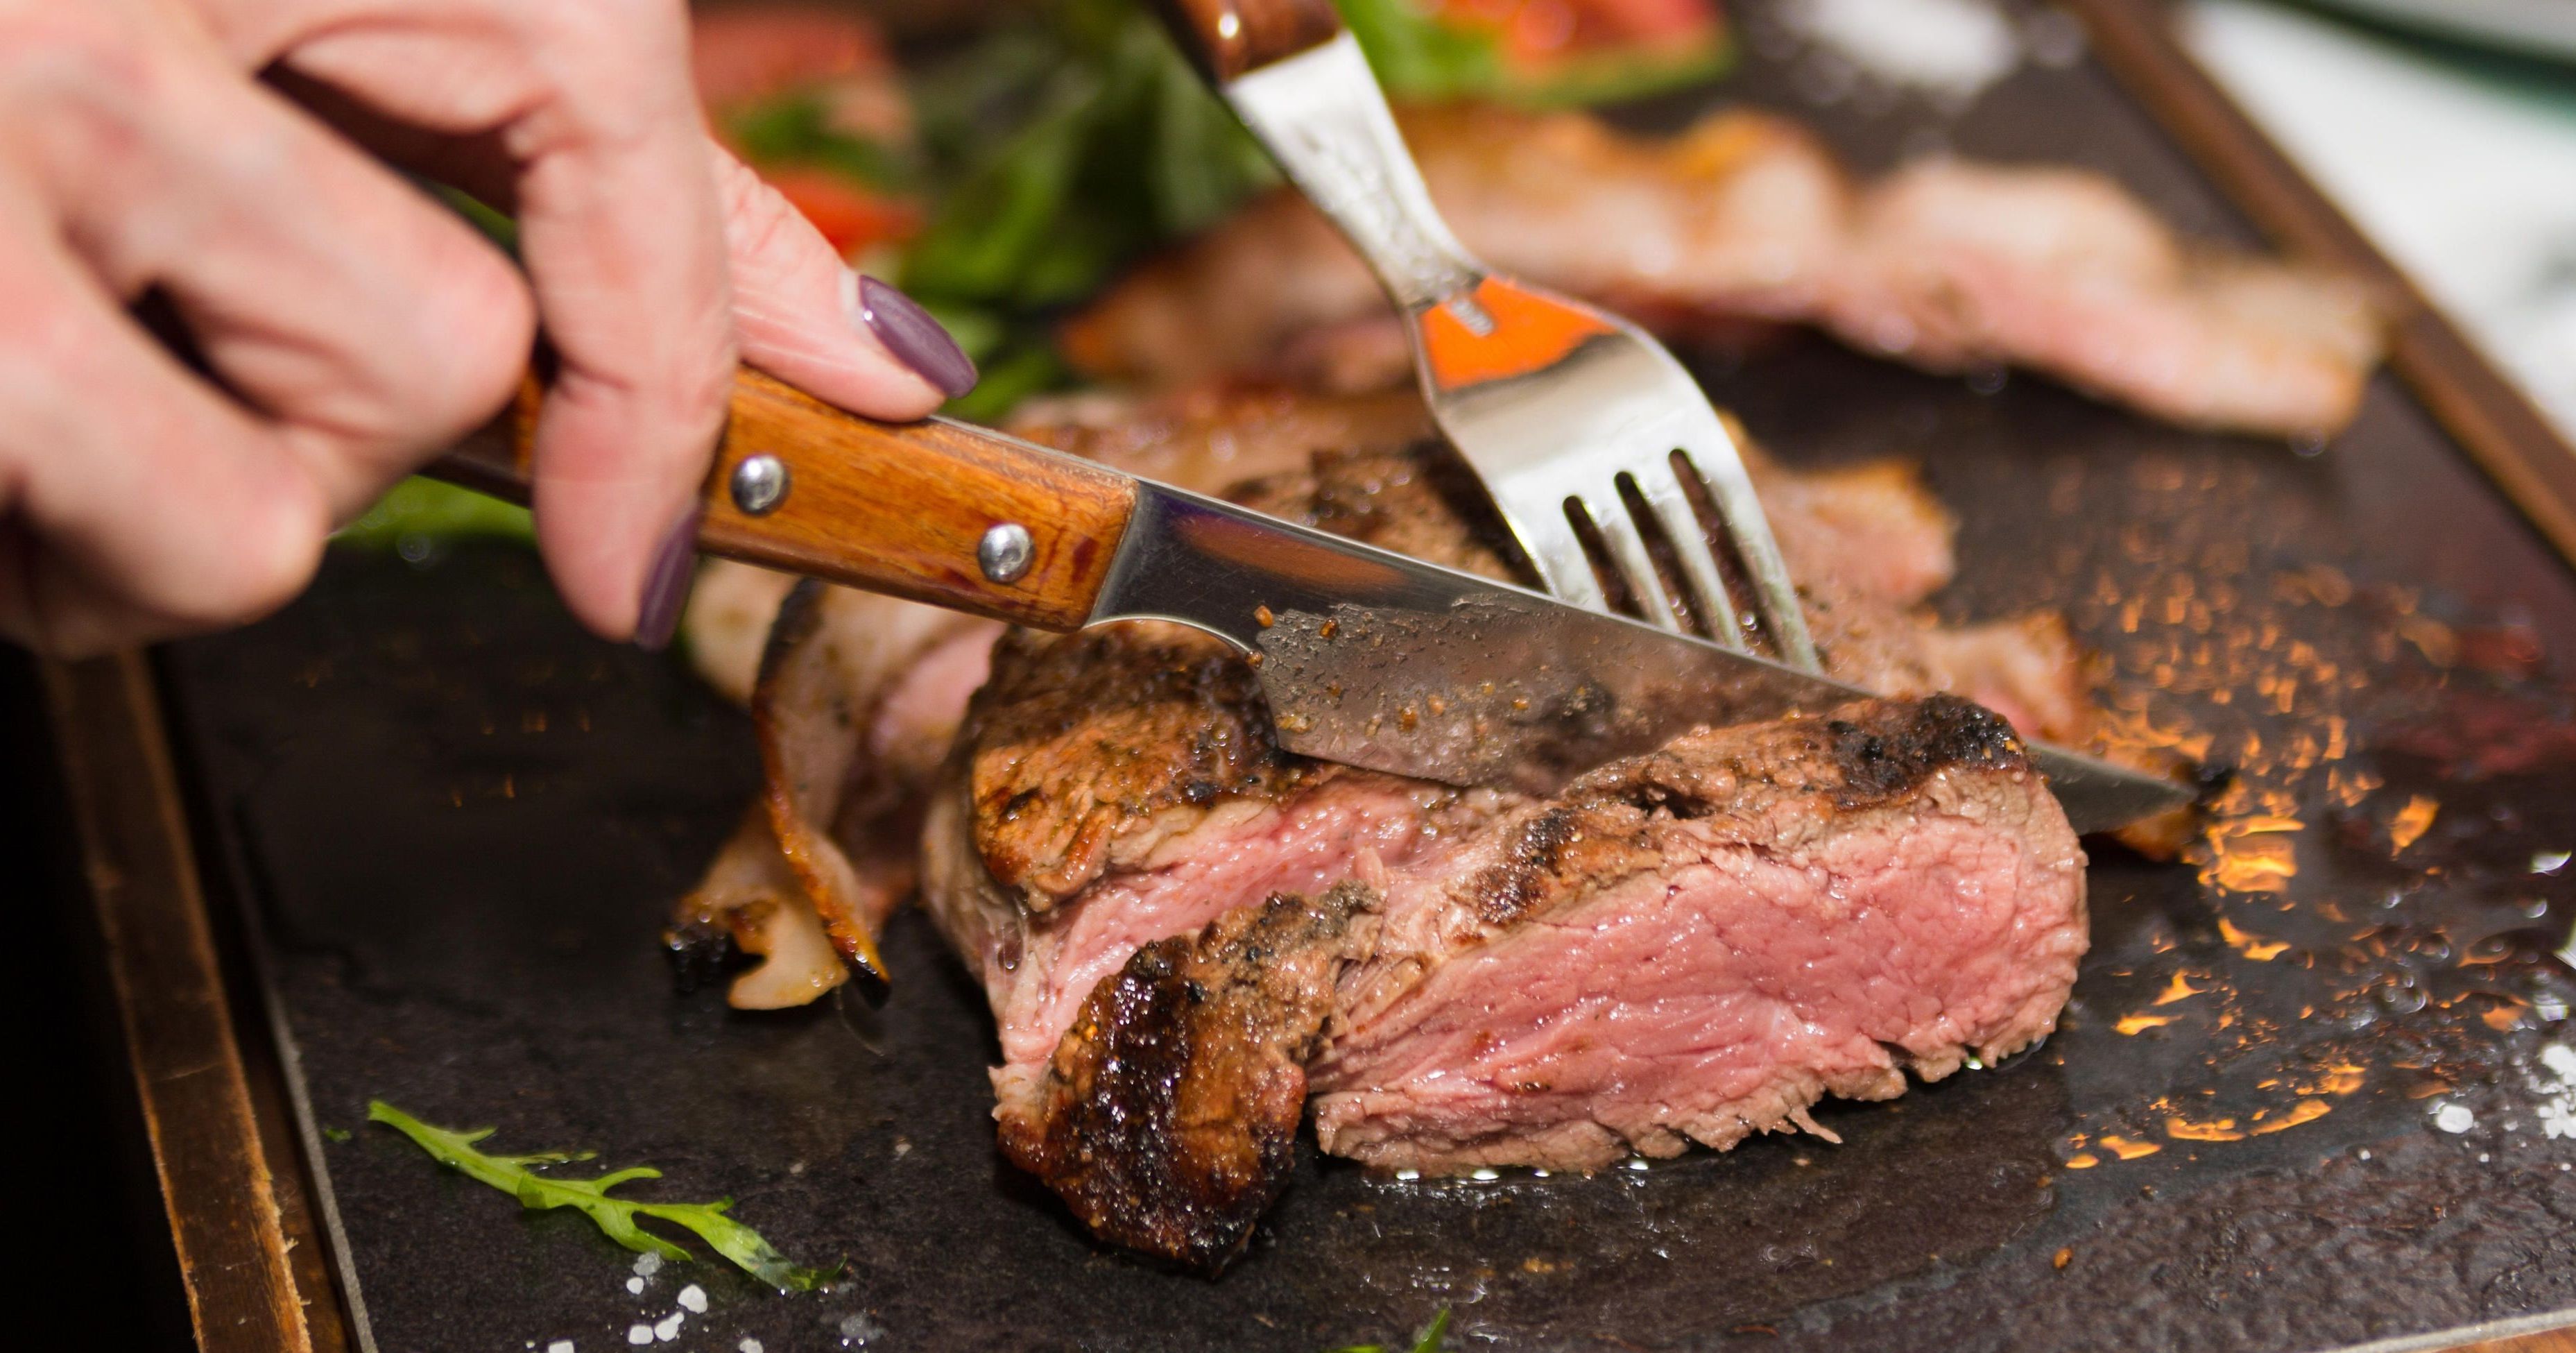 Men With Diet Rich In Animal Protein And Meat At Greater Risk Of Death